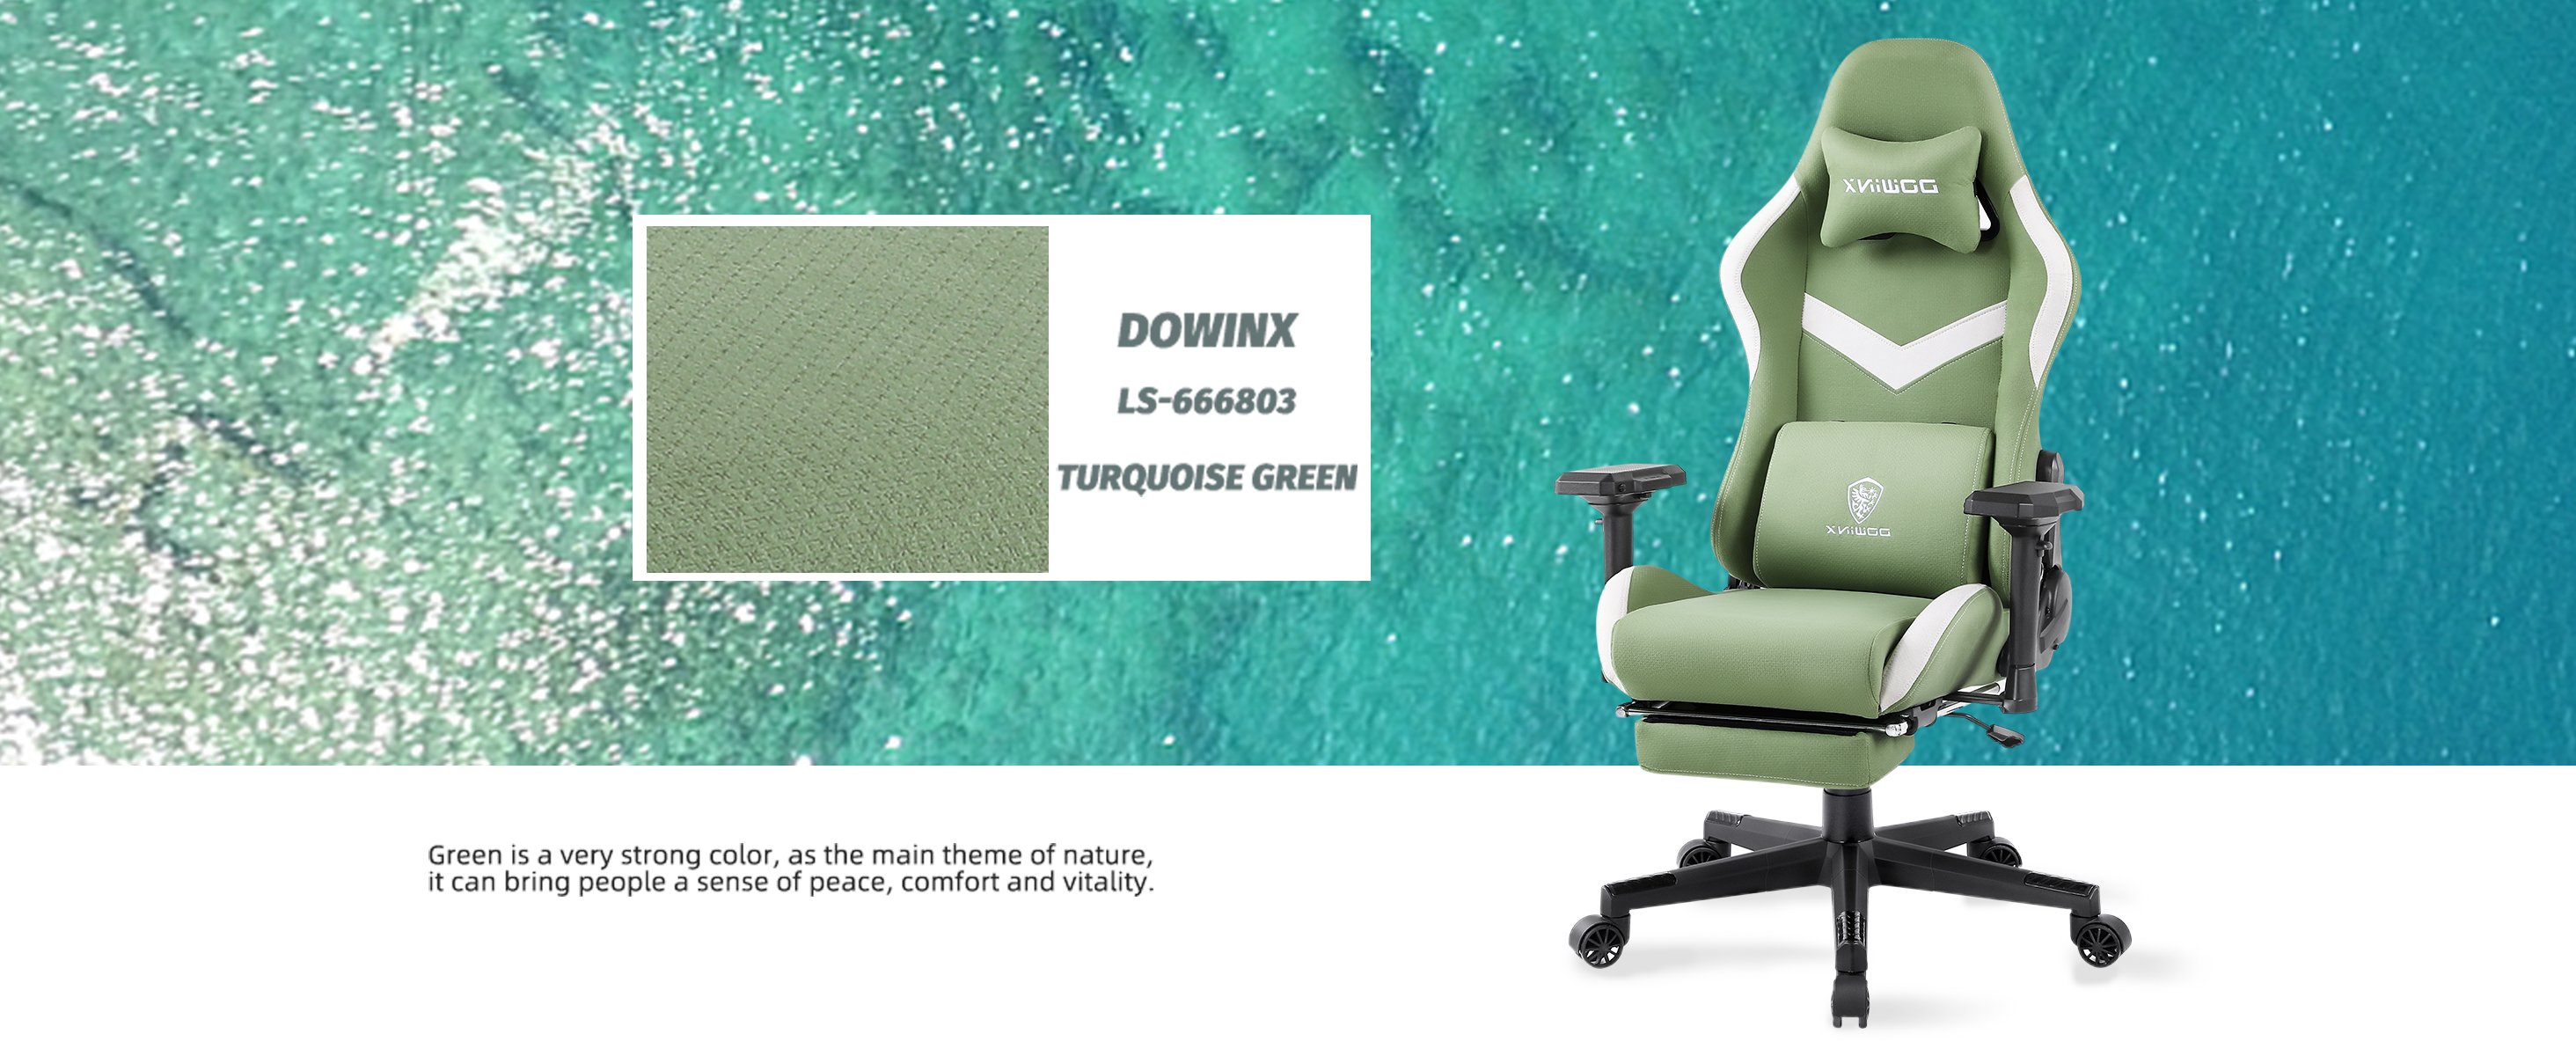 Dowinx Gaming Chair Breathable Fabric Office Chair with Pocket Spring  Cushion and 4D Armrest, High Back Ergonomic Computer Chair with Massage  Lumbar